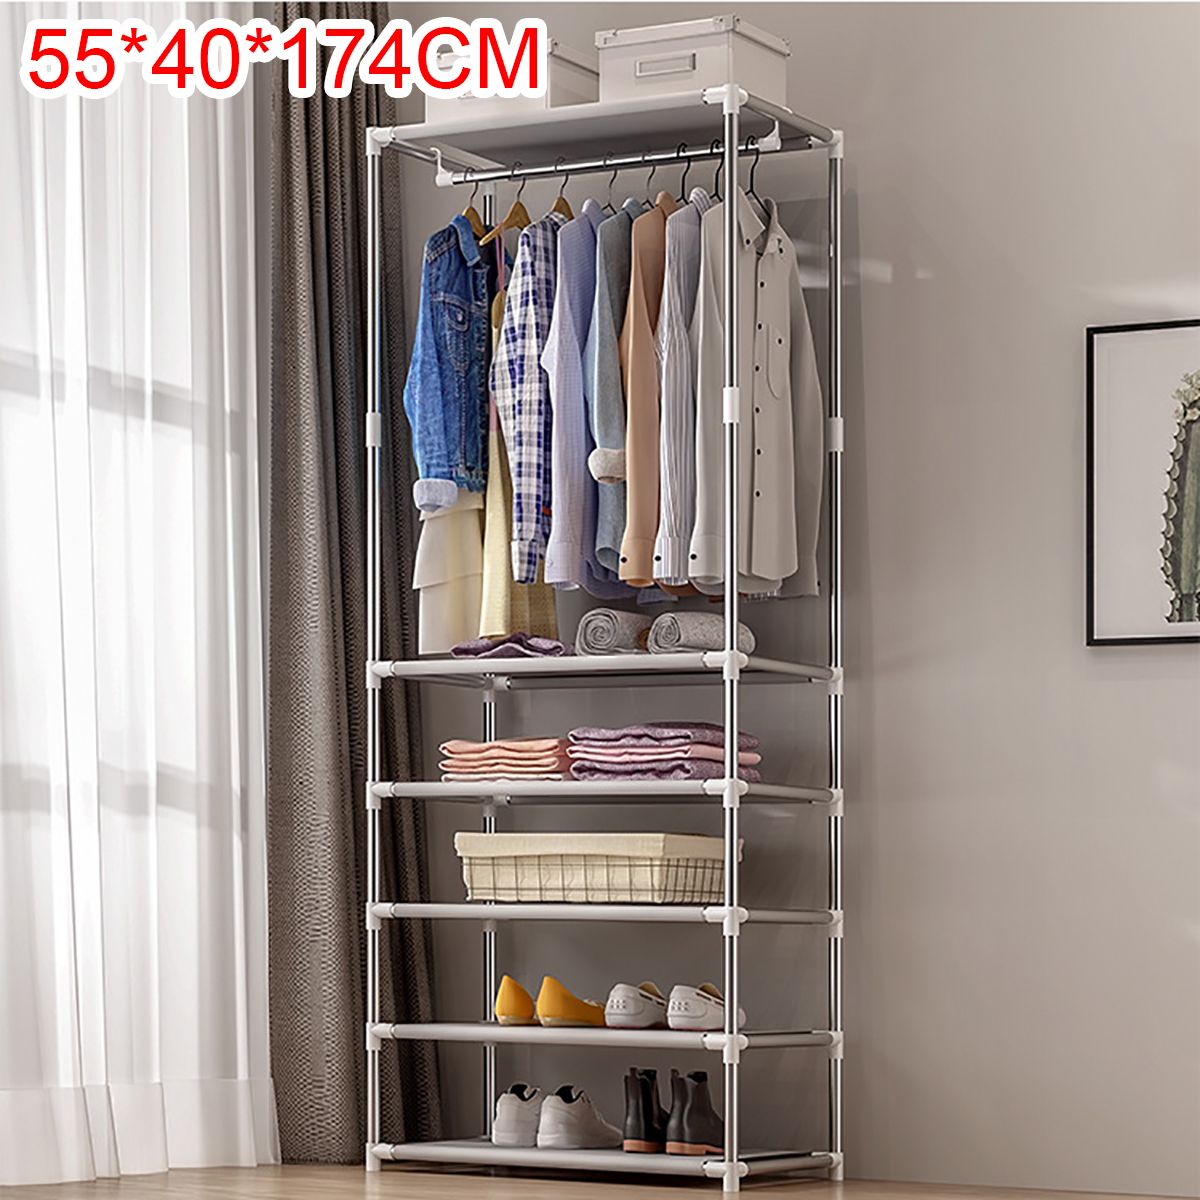 Simple Coat Rack Floor Clothes Hangers Creative Clothing Rack Shelf Easy Assembly Bedroom Hanging Clothing Racks Fashion Home Decorations 26